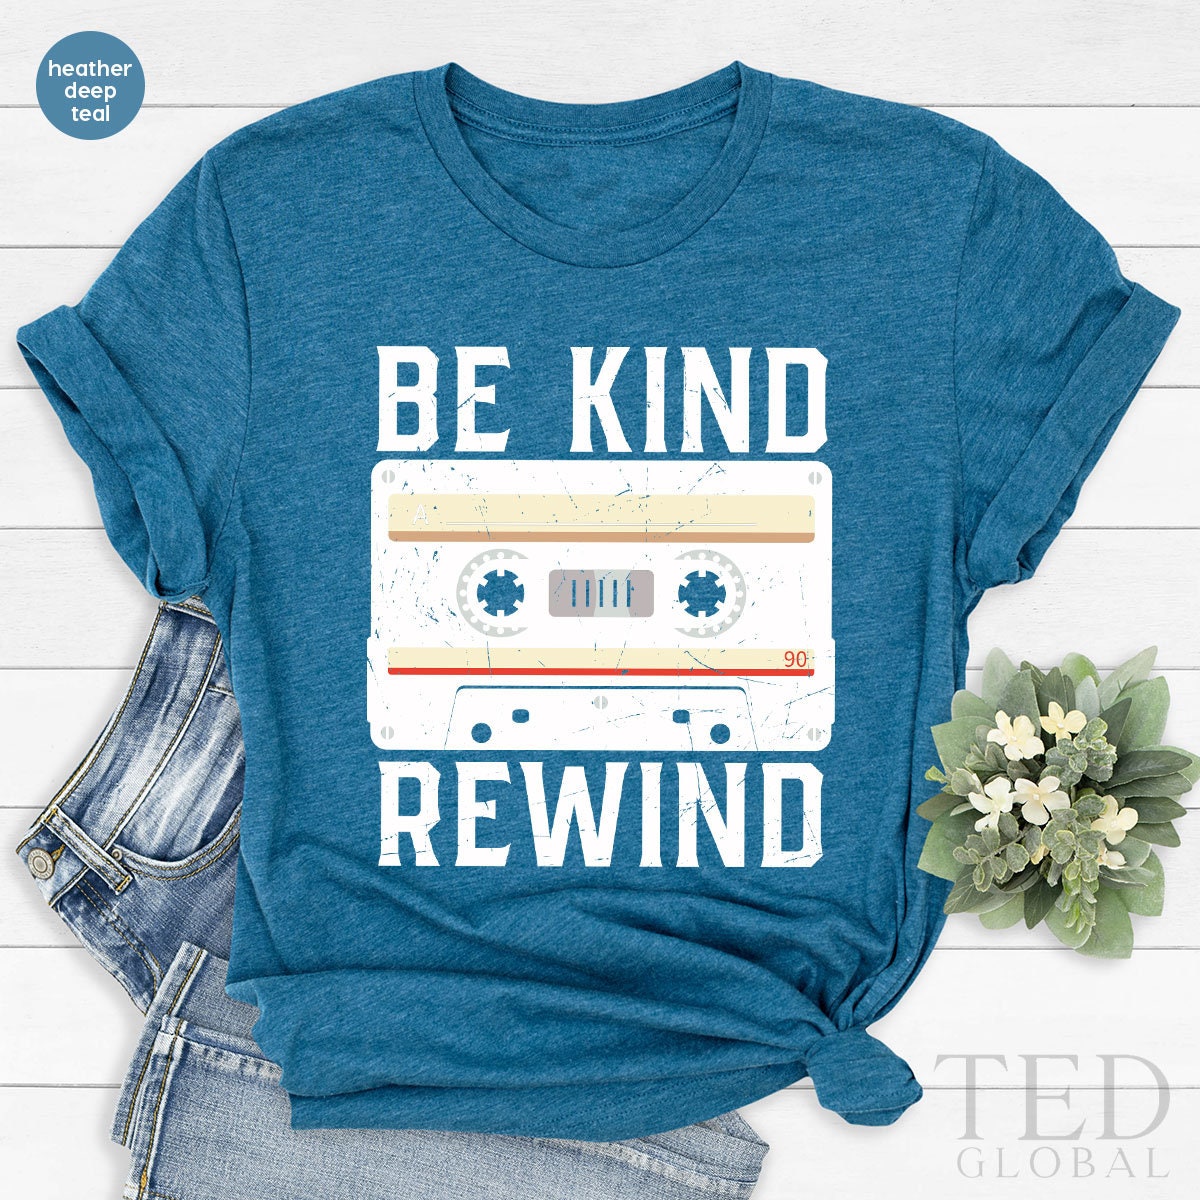 Be Kind Rewind Vintage T-Shirt, Vintage 80-90 TShirt, Tape Recorder Tee, Be Kind Shirts, 80-90 Years Historical Shirt, Gift For Historical - Fastdeliverytees.com